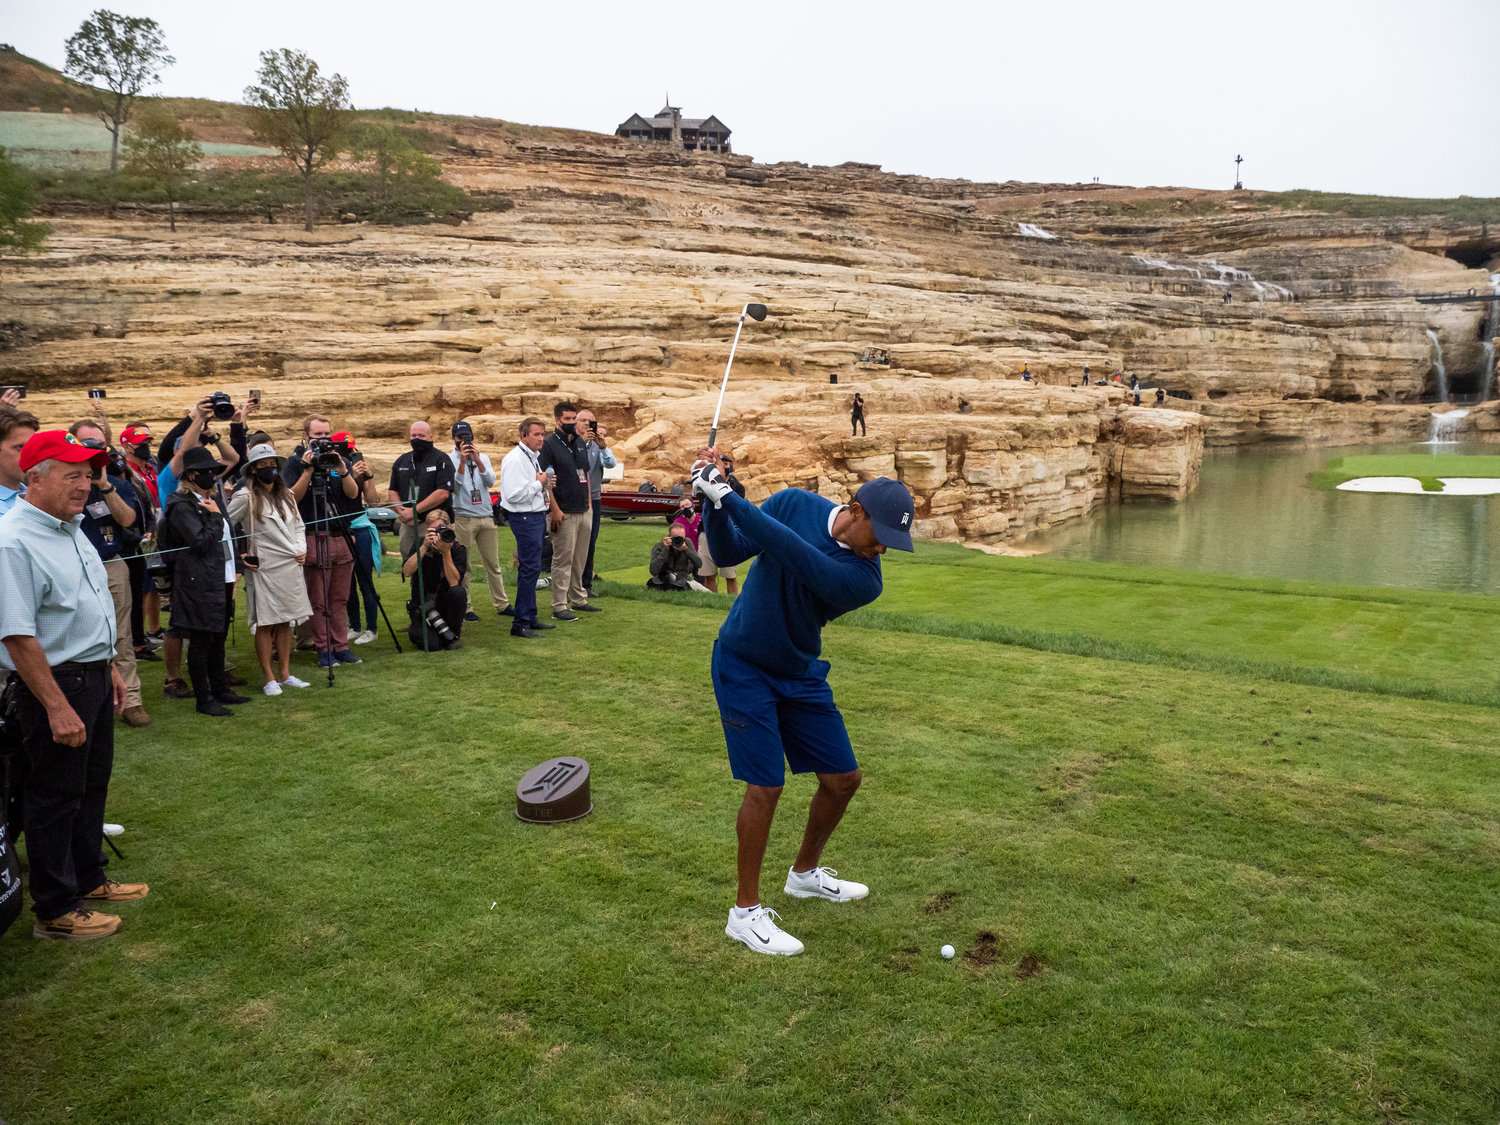 Big Cedar Lodge and Bass Pro Shops founder Johnny Morris, at left, watches Tiger Woods take aim at the new course.